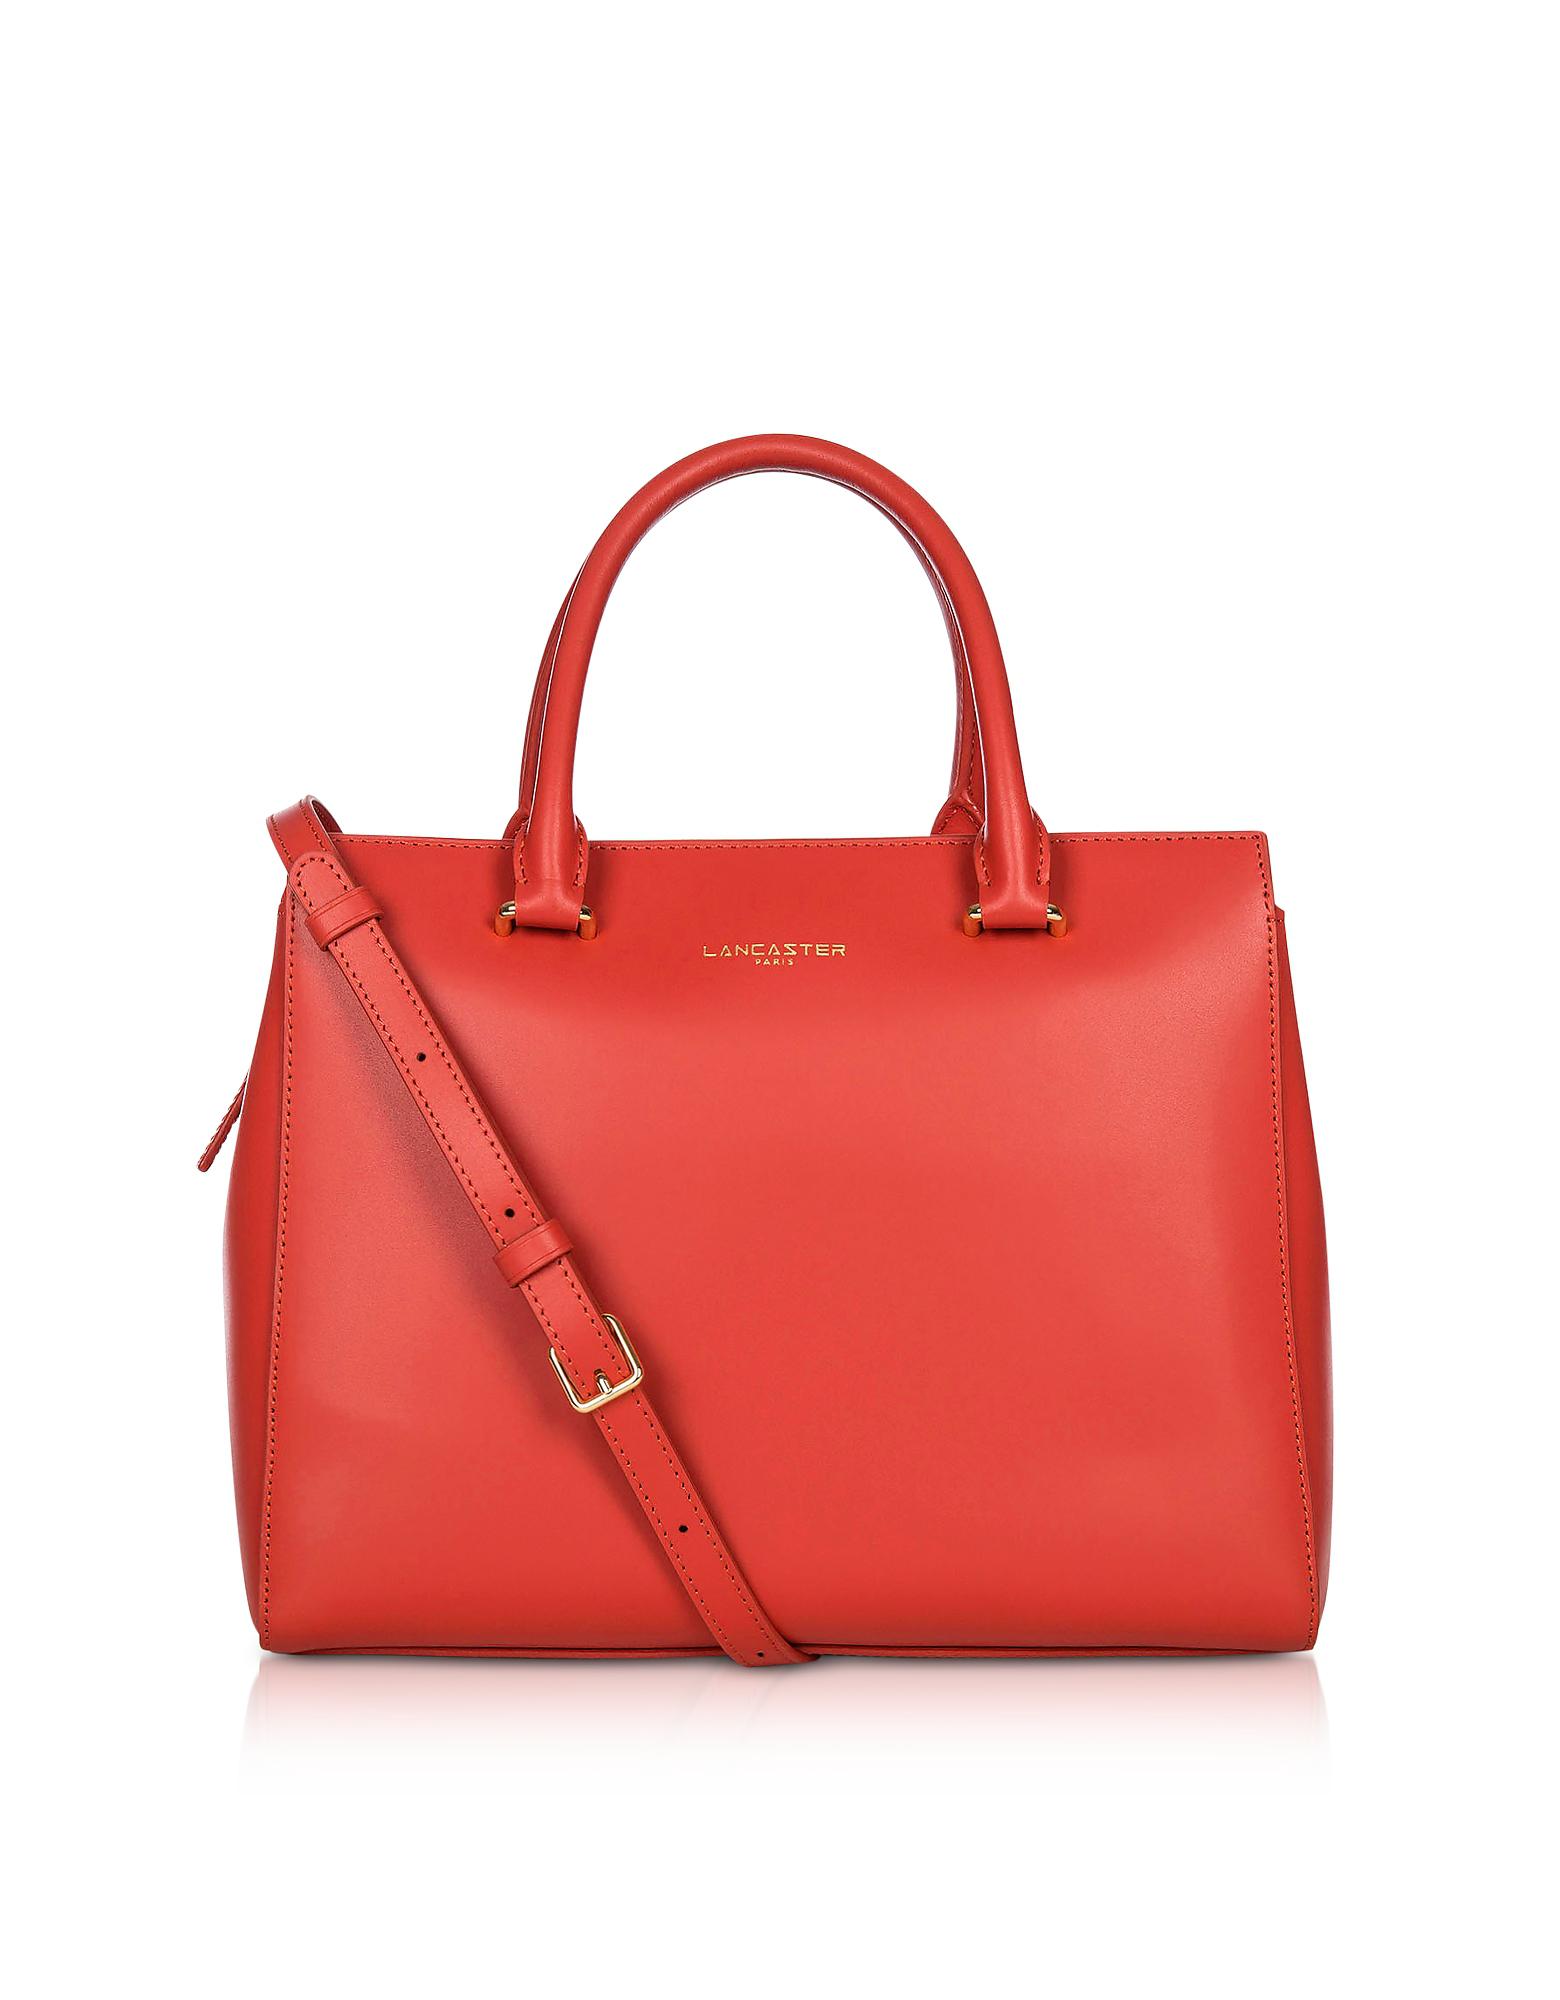 Lancaster Paris Camelia Smooth Leather Top Handle Satchel Bag in Red - Lyst